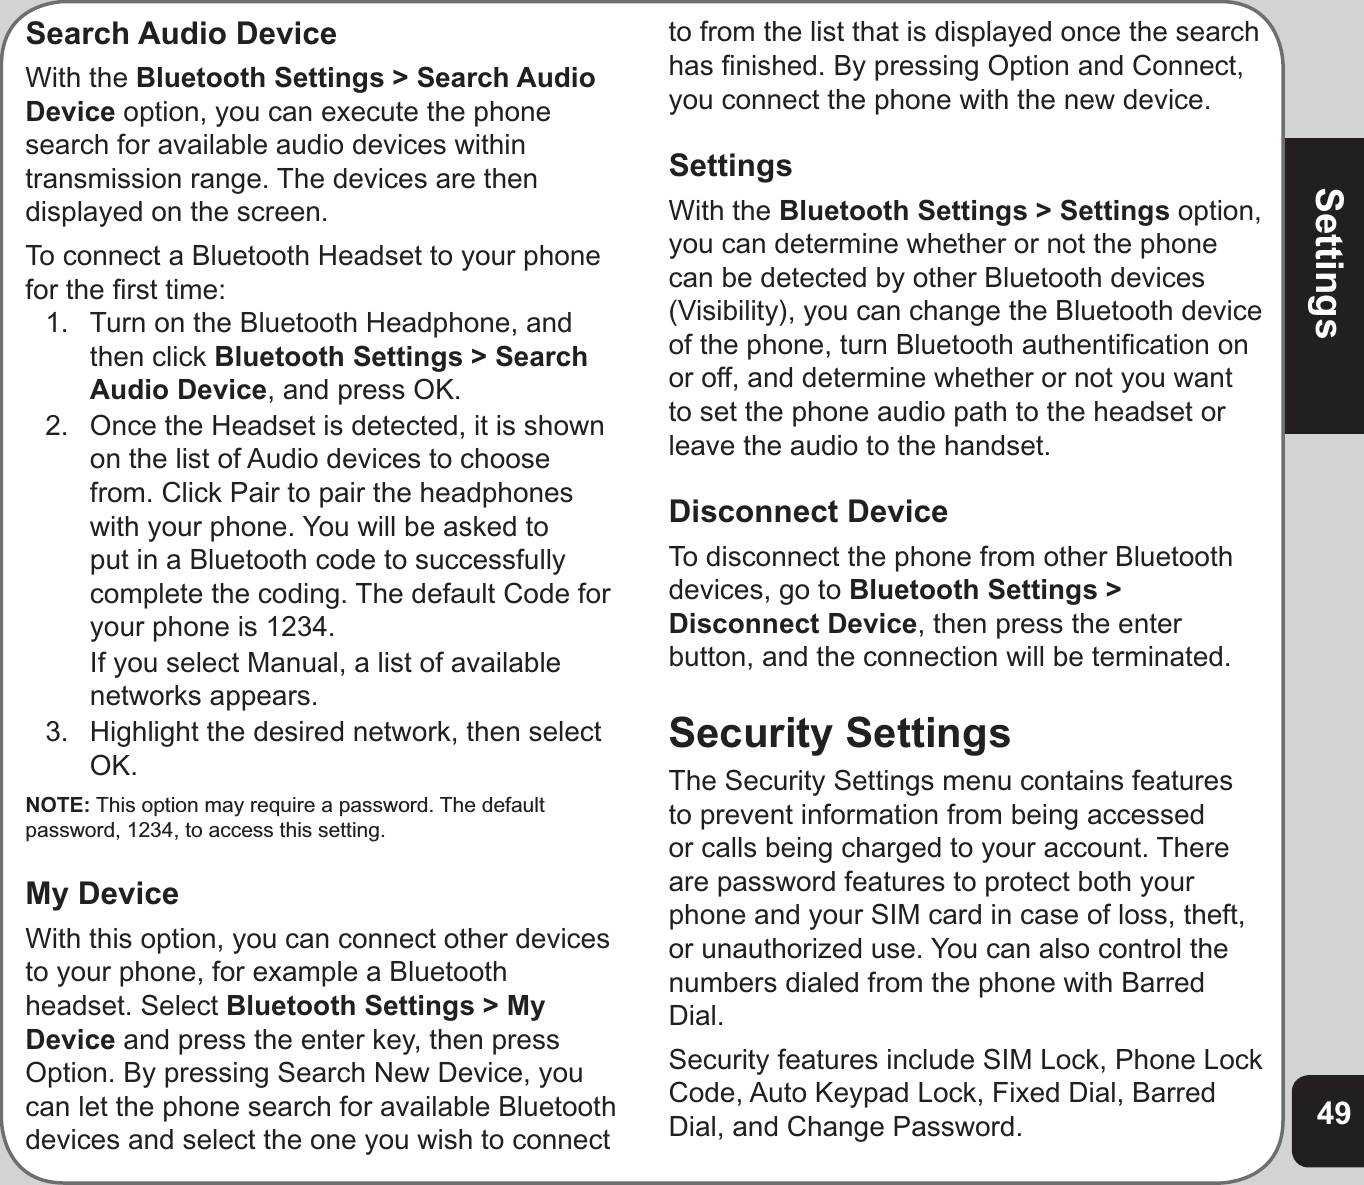 49SettingsSearch Audio DeviceWith the Bluetooth Settings &gt; Search Audio Device option, you can execute the phone search for available audio devices within transmission range. The devices are then displayed on the screen. To connect a Bluetooth Headset to your phone for the ﬁ rst time: 1.   Turn on the Bluetooth Headphone, and then click Bluetooth Settings &gt; Search Audio Device, and press OK.2.  Once the Headset is detected, it is shown on the list of Audio devices to choose from. Click Pair to pair the headphones with your phone. You will be asked to put in a Bluetooth code to successfully complete the coding. The default Code for your phone is 1234.   If you select Manual, a list of available networks appears. 3.  Highlight the desired network, then select OK.NOTE: This option may require a password. The default password, 1234, to access this setting. My DeviceWith this option, you can connect other devices to your phone, for example a Bluetooth headset. Select Bluetooth Settings &gt; My Device and press the enter key, then press Option. By pressing Search New Device, you can let the phone search for available Bluetooth devices and select the one you wish to connect to from the list that is displayed once the search has ﬁ nished. By pressing Option and Connect, you connect the phone with the new device.SettingsWith the Bluetooth Settings &gt; Settings option, you can determine whether or not the phone can be detected by other Bluetooth devices (Visibility), you can change the Bluetooth device of the phone, turn Bluetooth authentiﬁ cation on or off, and determine whether or not you want to set the phone audio path to the headset or leave the audio to the handset.Disconnect DeviceTo disconnect the phone from other Bluetooth devices, go to Bluetooth Settings &gt; Disconnect Device, then press the enter button, and the connection will be terminated. Security SettingsThe Security Settings menu contains features to prevent information from being accessed or calls being charged to your account. There are password features to protect both your phone and your SIM card in case of loss, theft, or unauthorized use. You can also control the numbers dialed from the phone with Barred Dial.Security features include SIM Lock, Phone Lock Code, Auto Keypad Lock, Fixed Dial, Barred Dial, and Change Password.